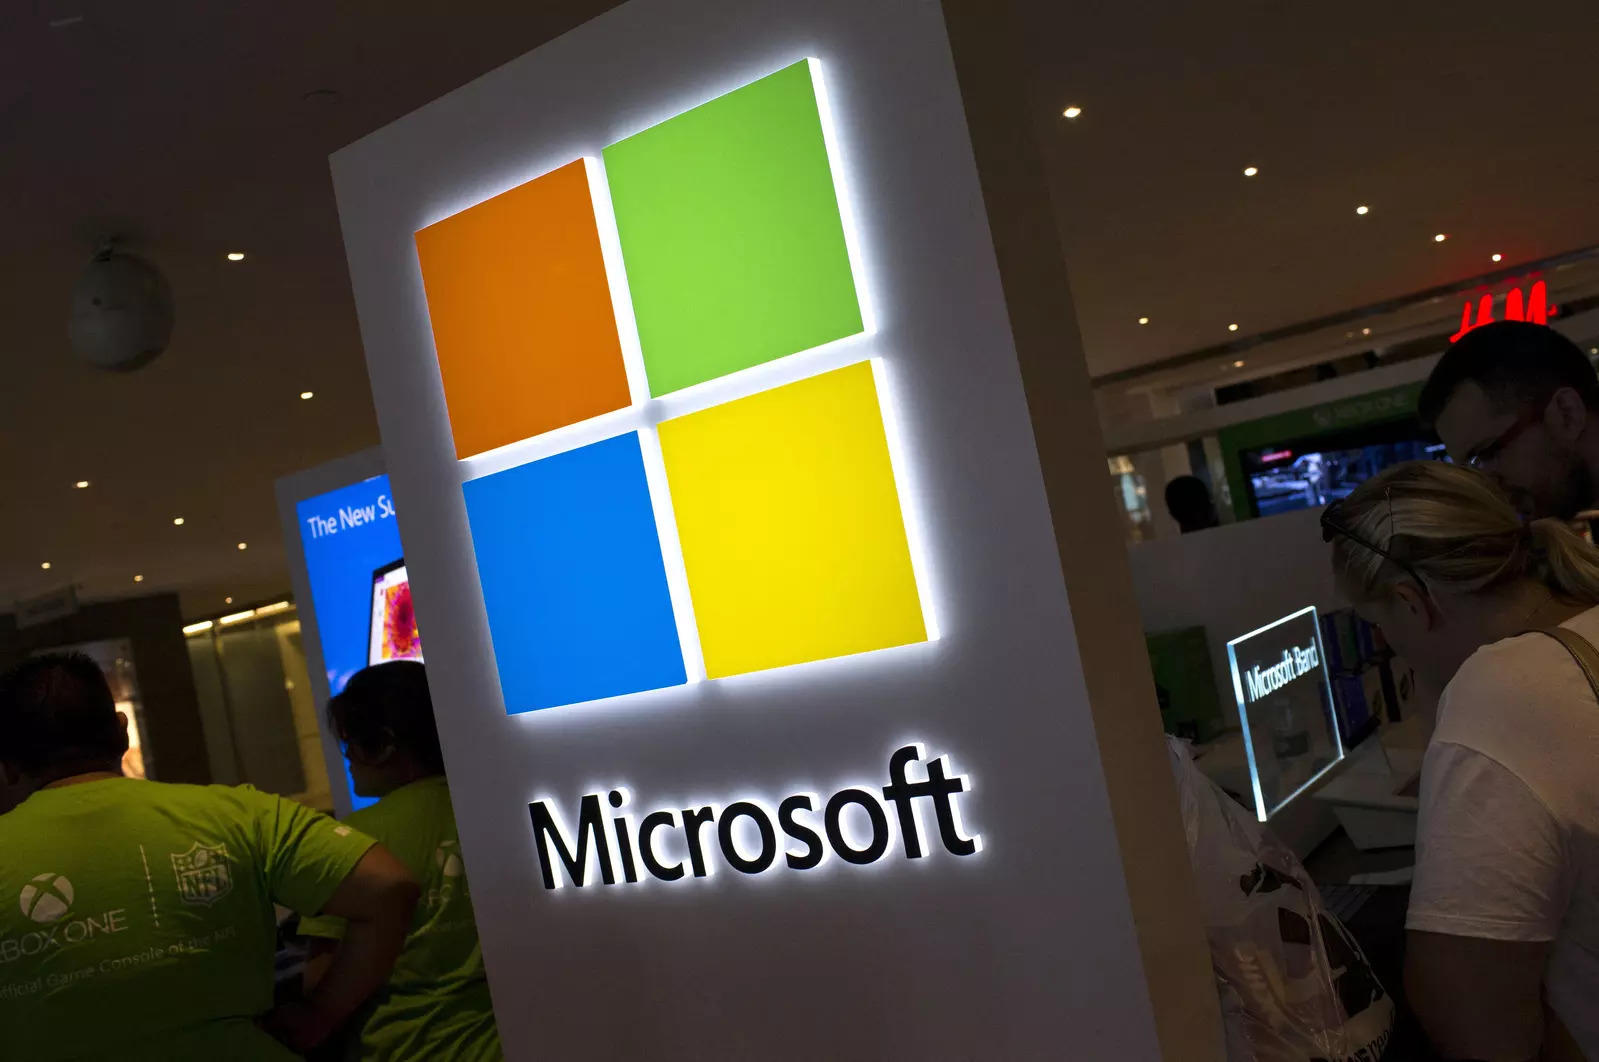  FILE PHOTO: The Microsoft logo is seen at the Microsoft store in New York City, July 28, 2015. REUTERS/Mike Segar